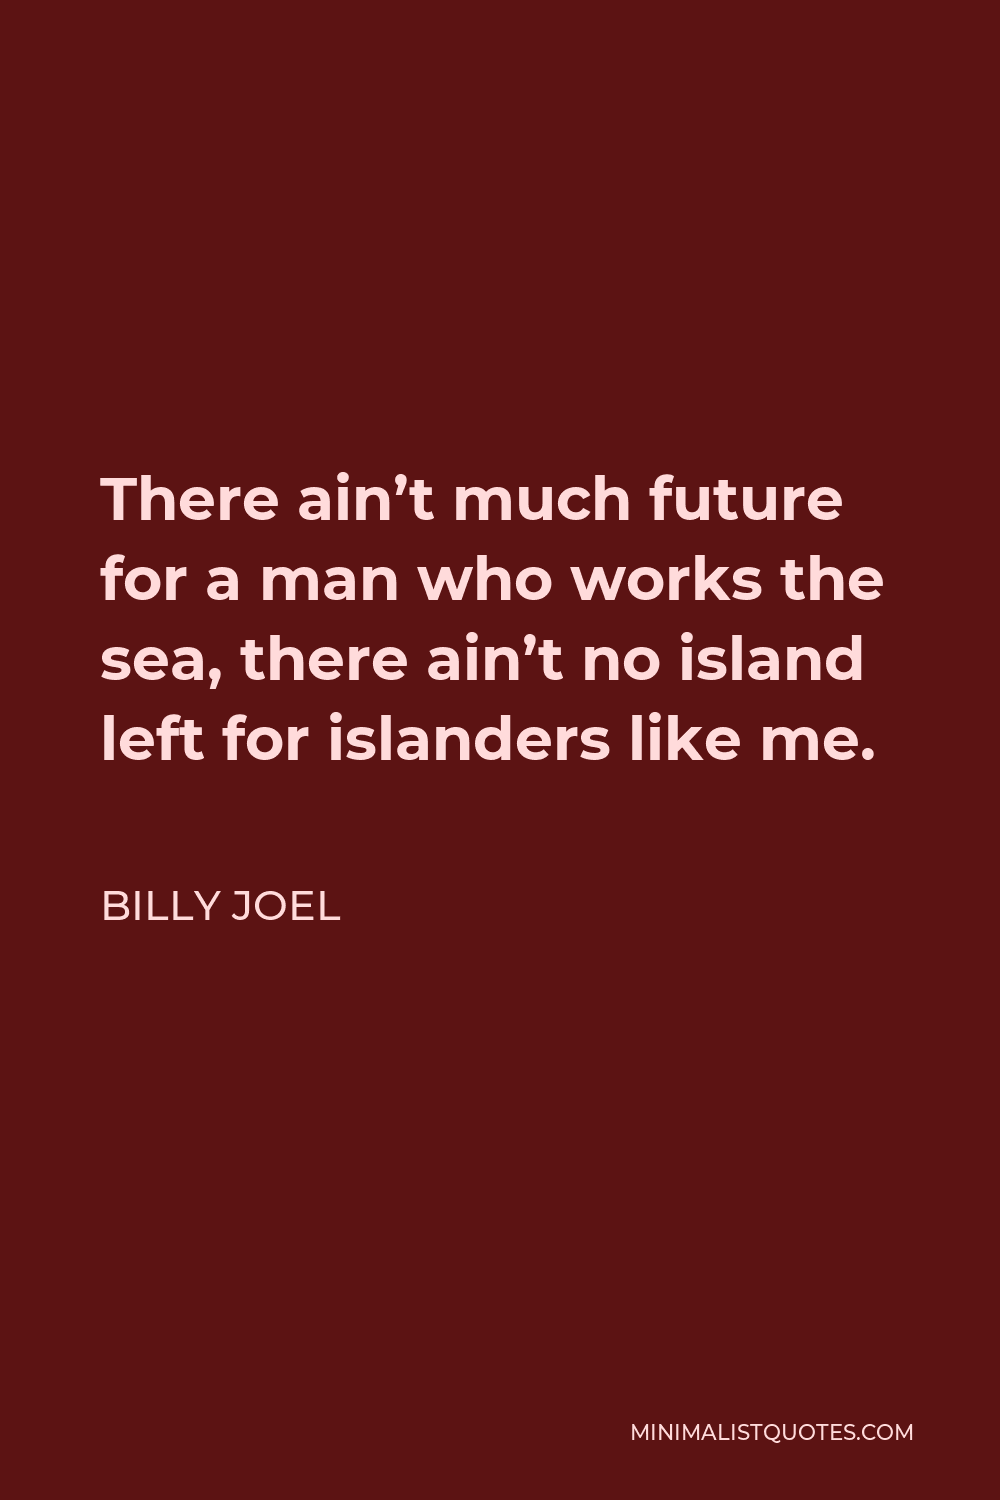 Billy Joel Quote - There ain’t much future for a man who works the sea, there ain’t no island left for islanders like me.